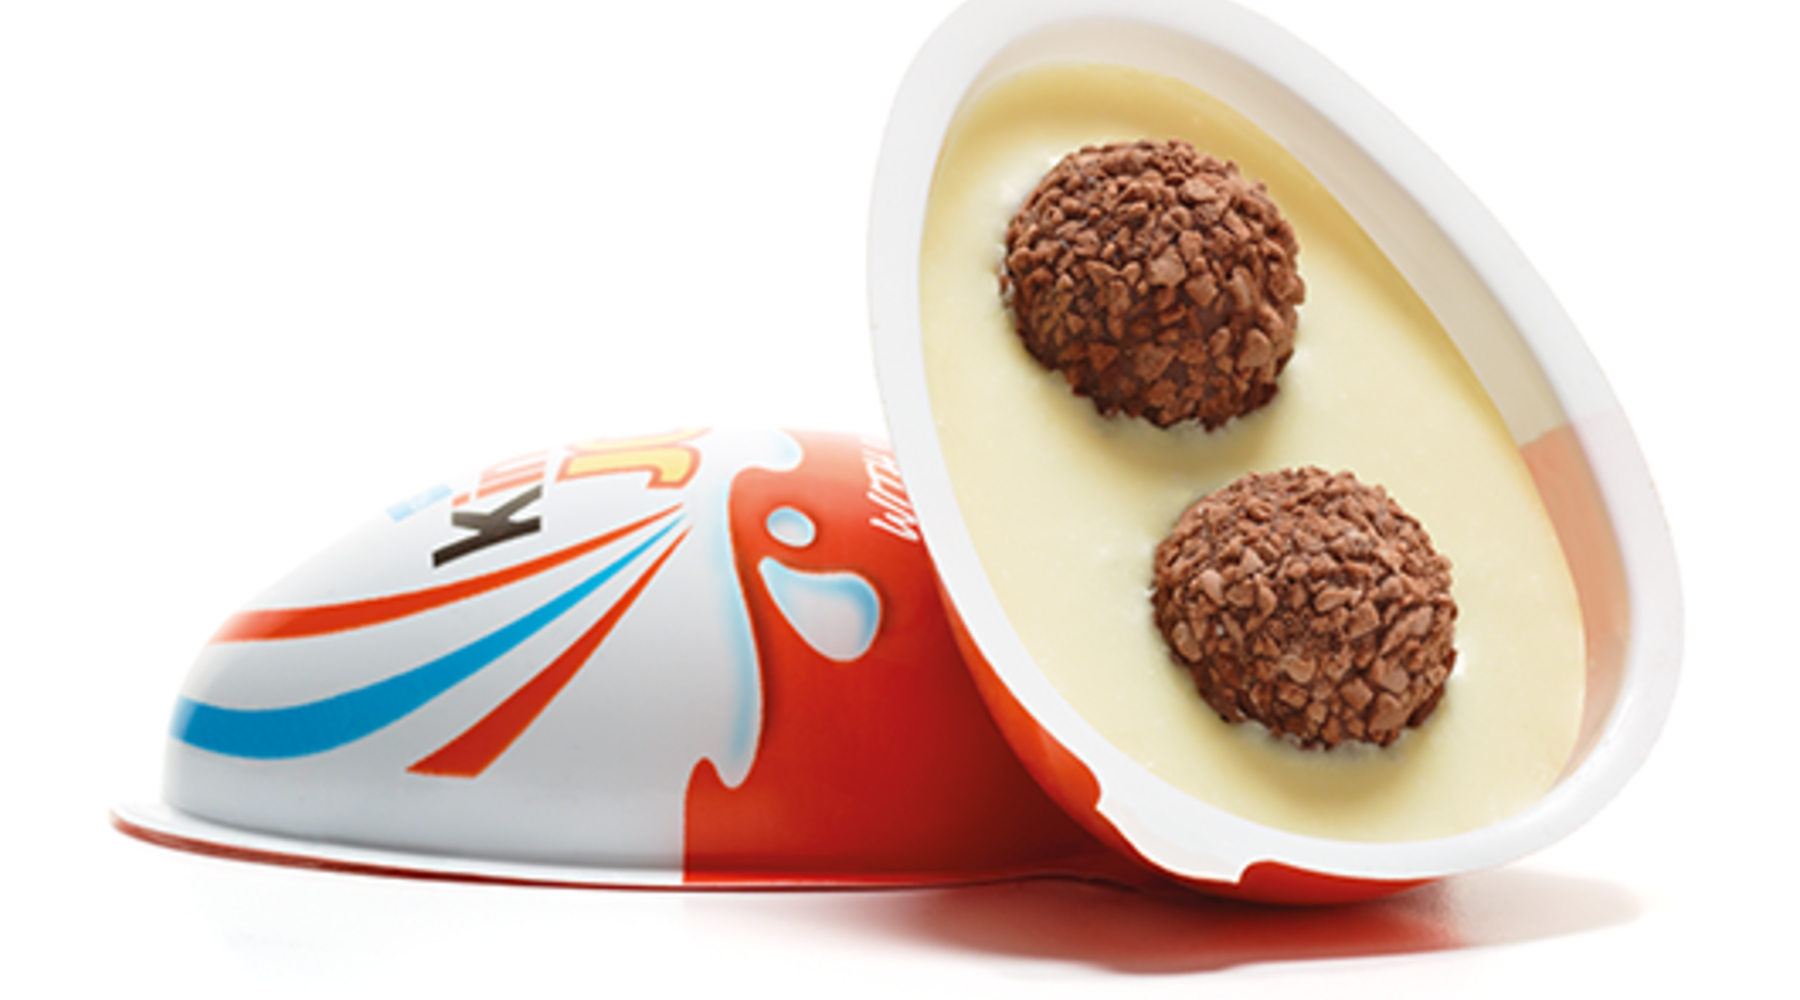 Joy! Kinder Eggs are coming to America - Marketplace